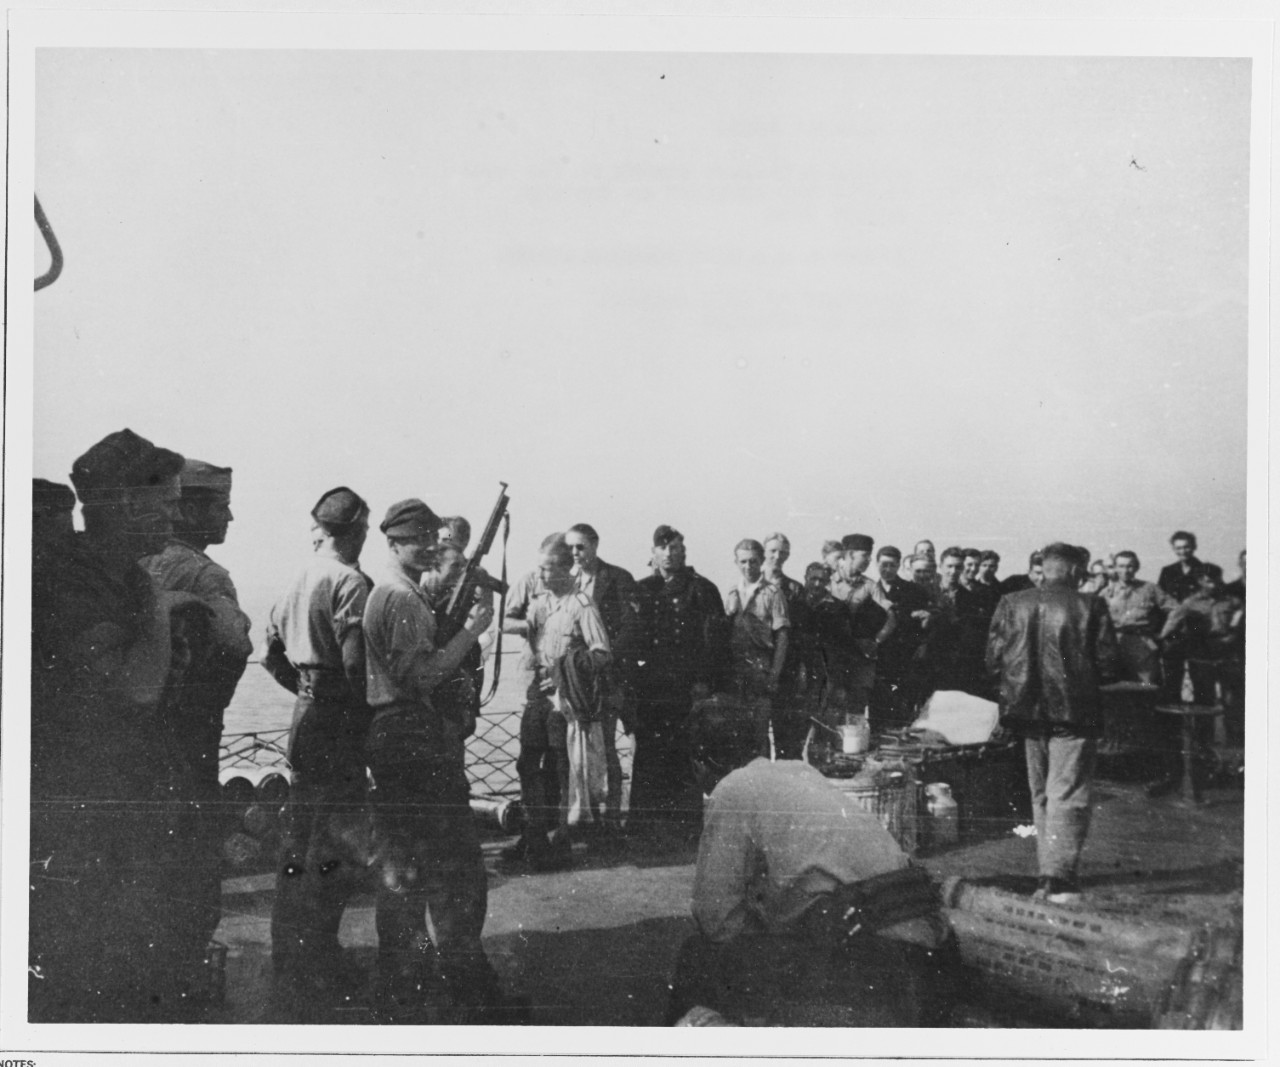 USS ENDICOTT. German prisoners lined up for chow on Foc'sle, August 1944. En route to Toulon, France